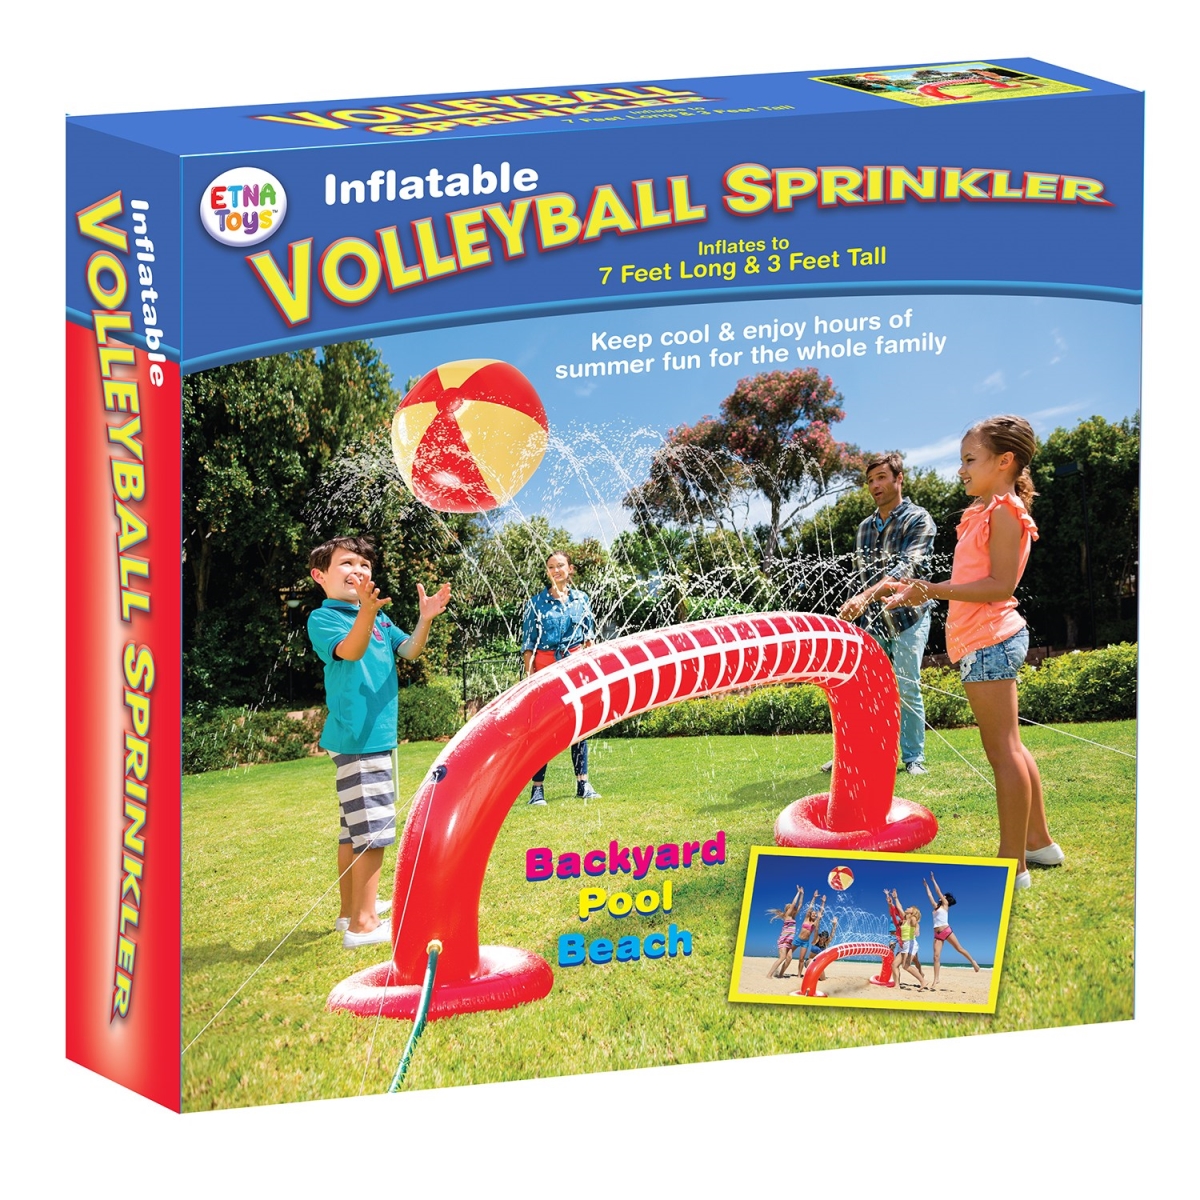 Picture of 212 Main 5295 Volleyball Sprinkler with a Ball